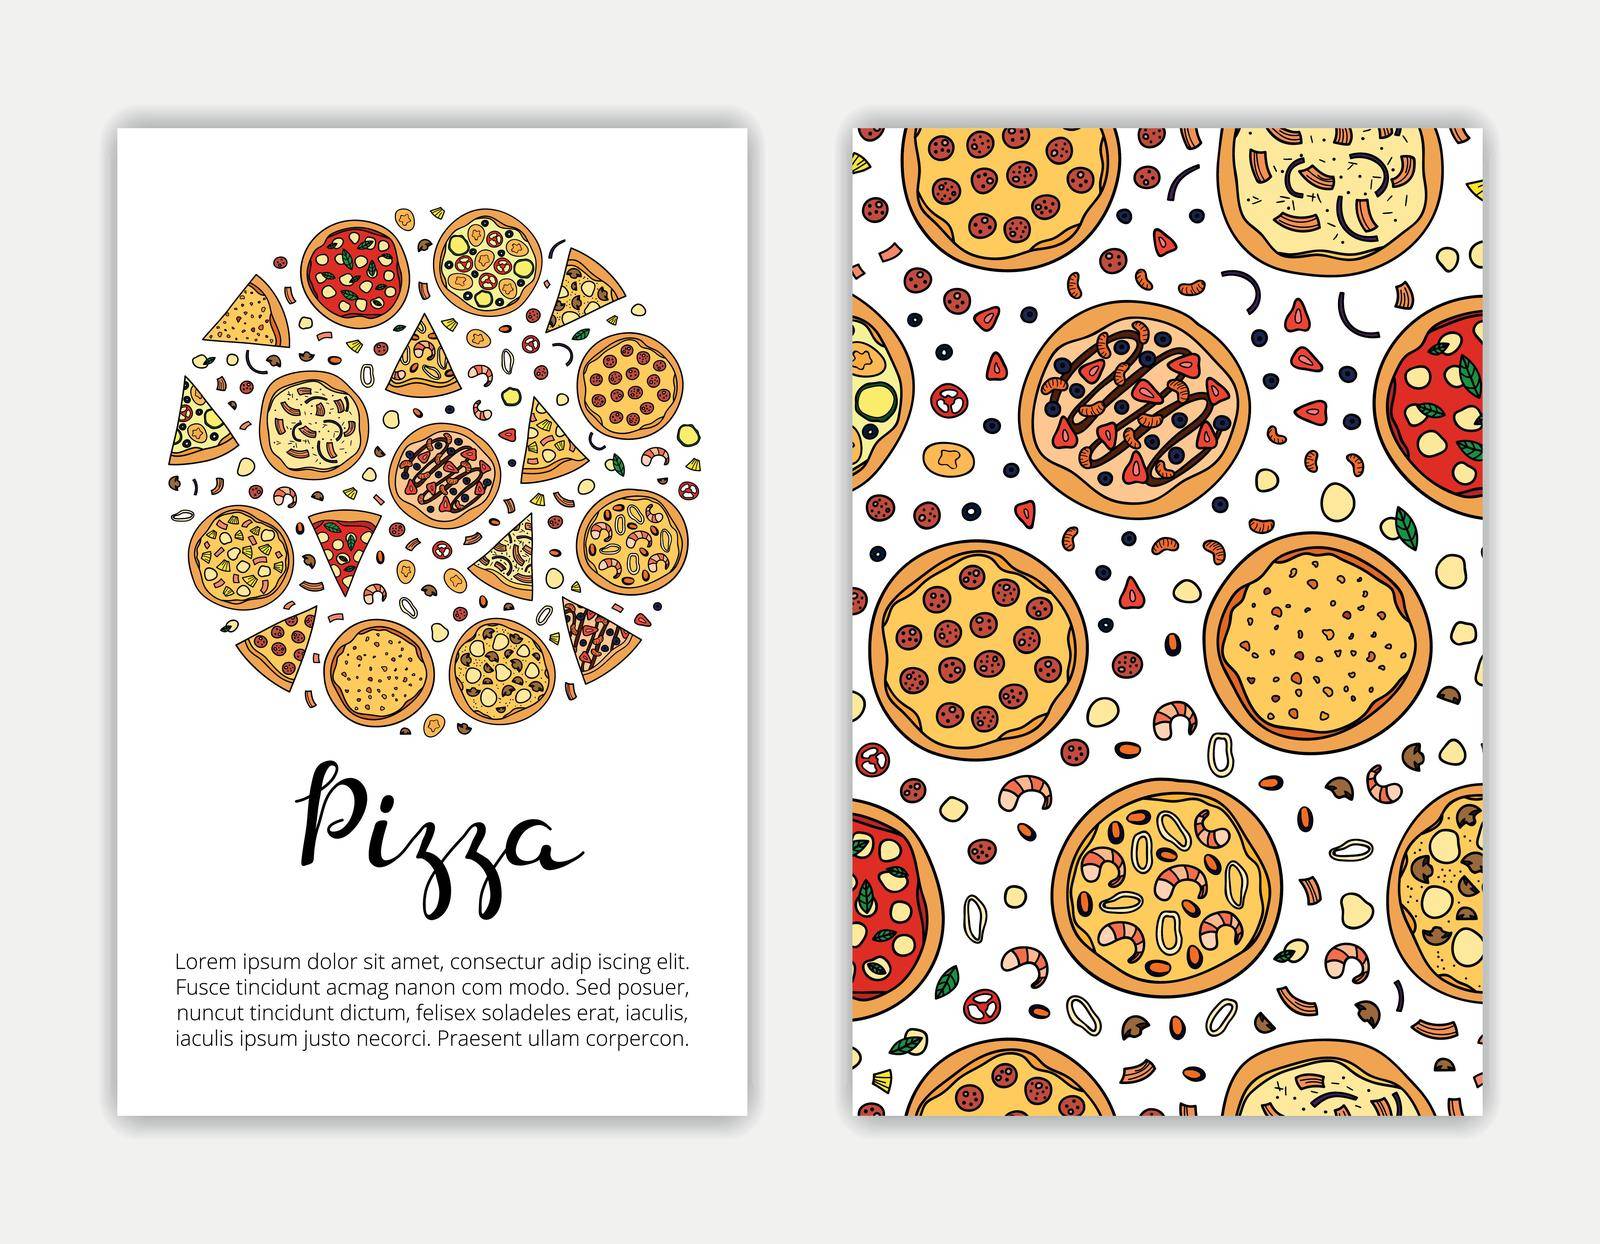 Card templates with hand drawn colored pizza. Used clipping mask.